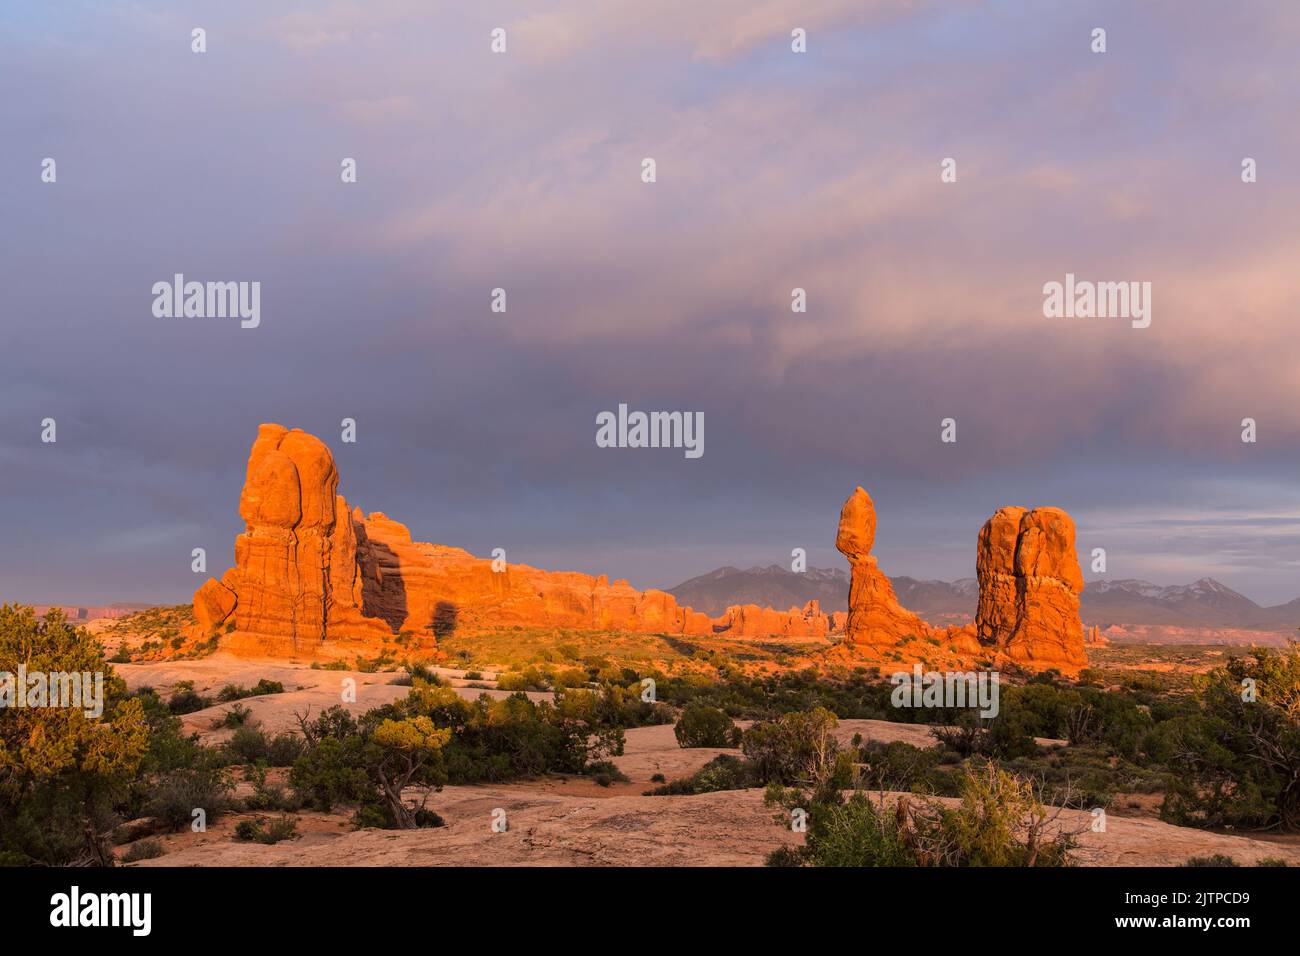 Sunset skies over Balanced Rock in Arches National Park near Moab, Utah.  In the background are the La Sal Mountains. Stock Photo